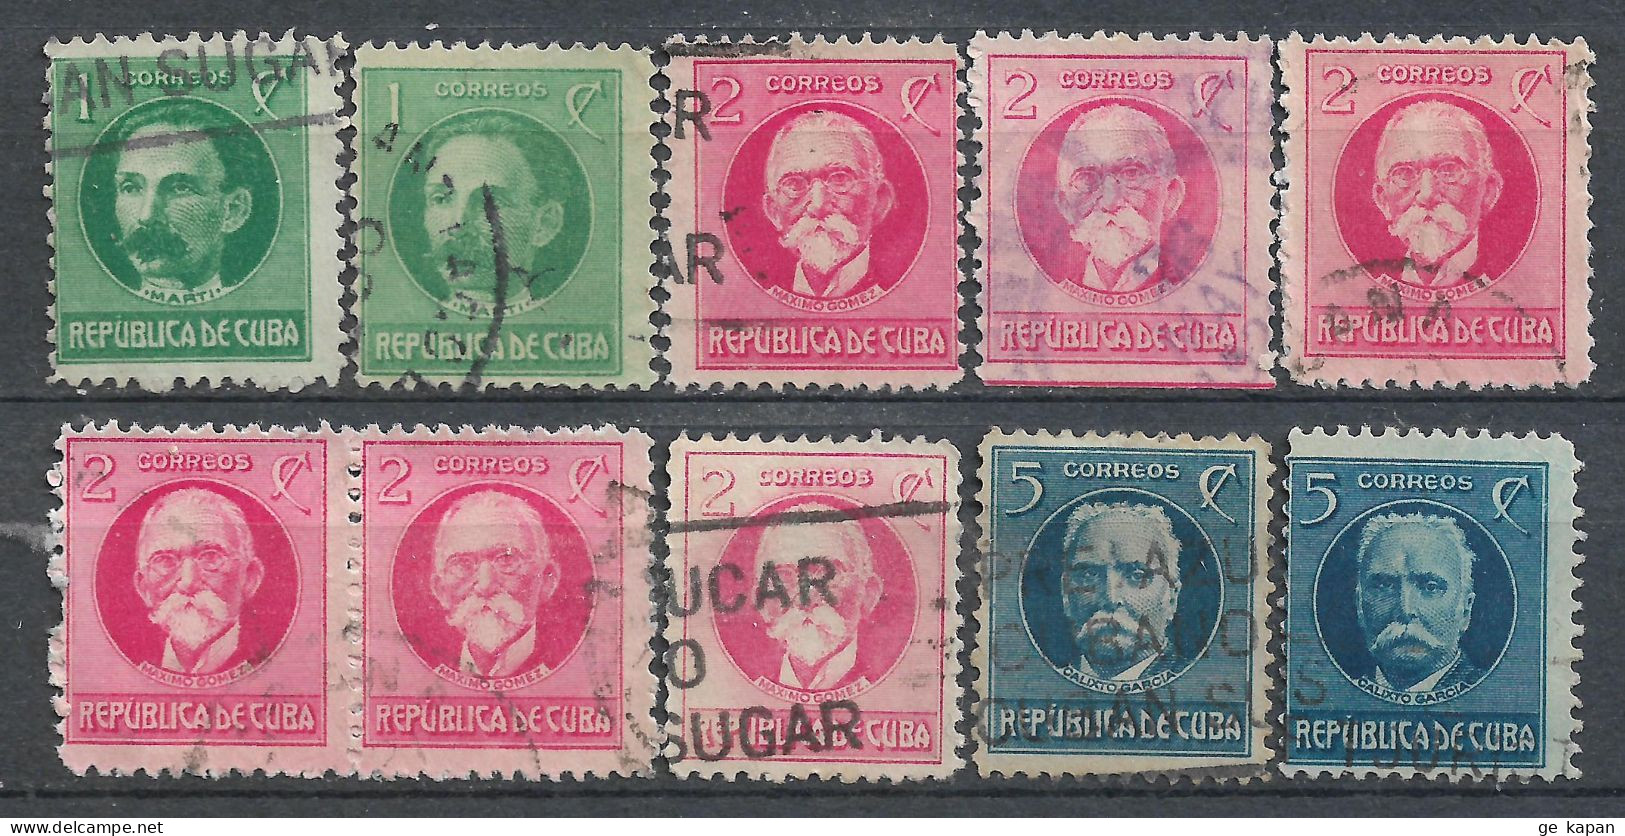 1925 CUBA Set Of 7 USED STAMPS (Michel # 48A,49A,51A) CV €2.10 - Used Stamps